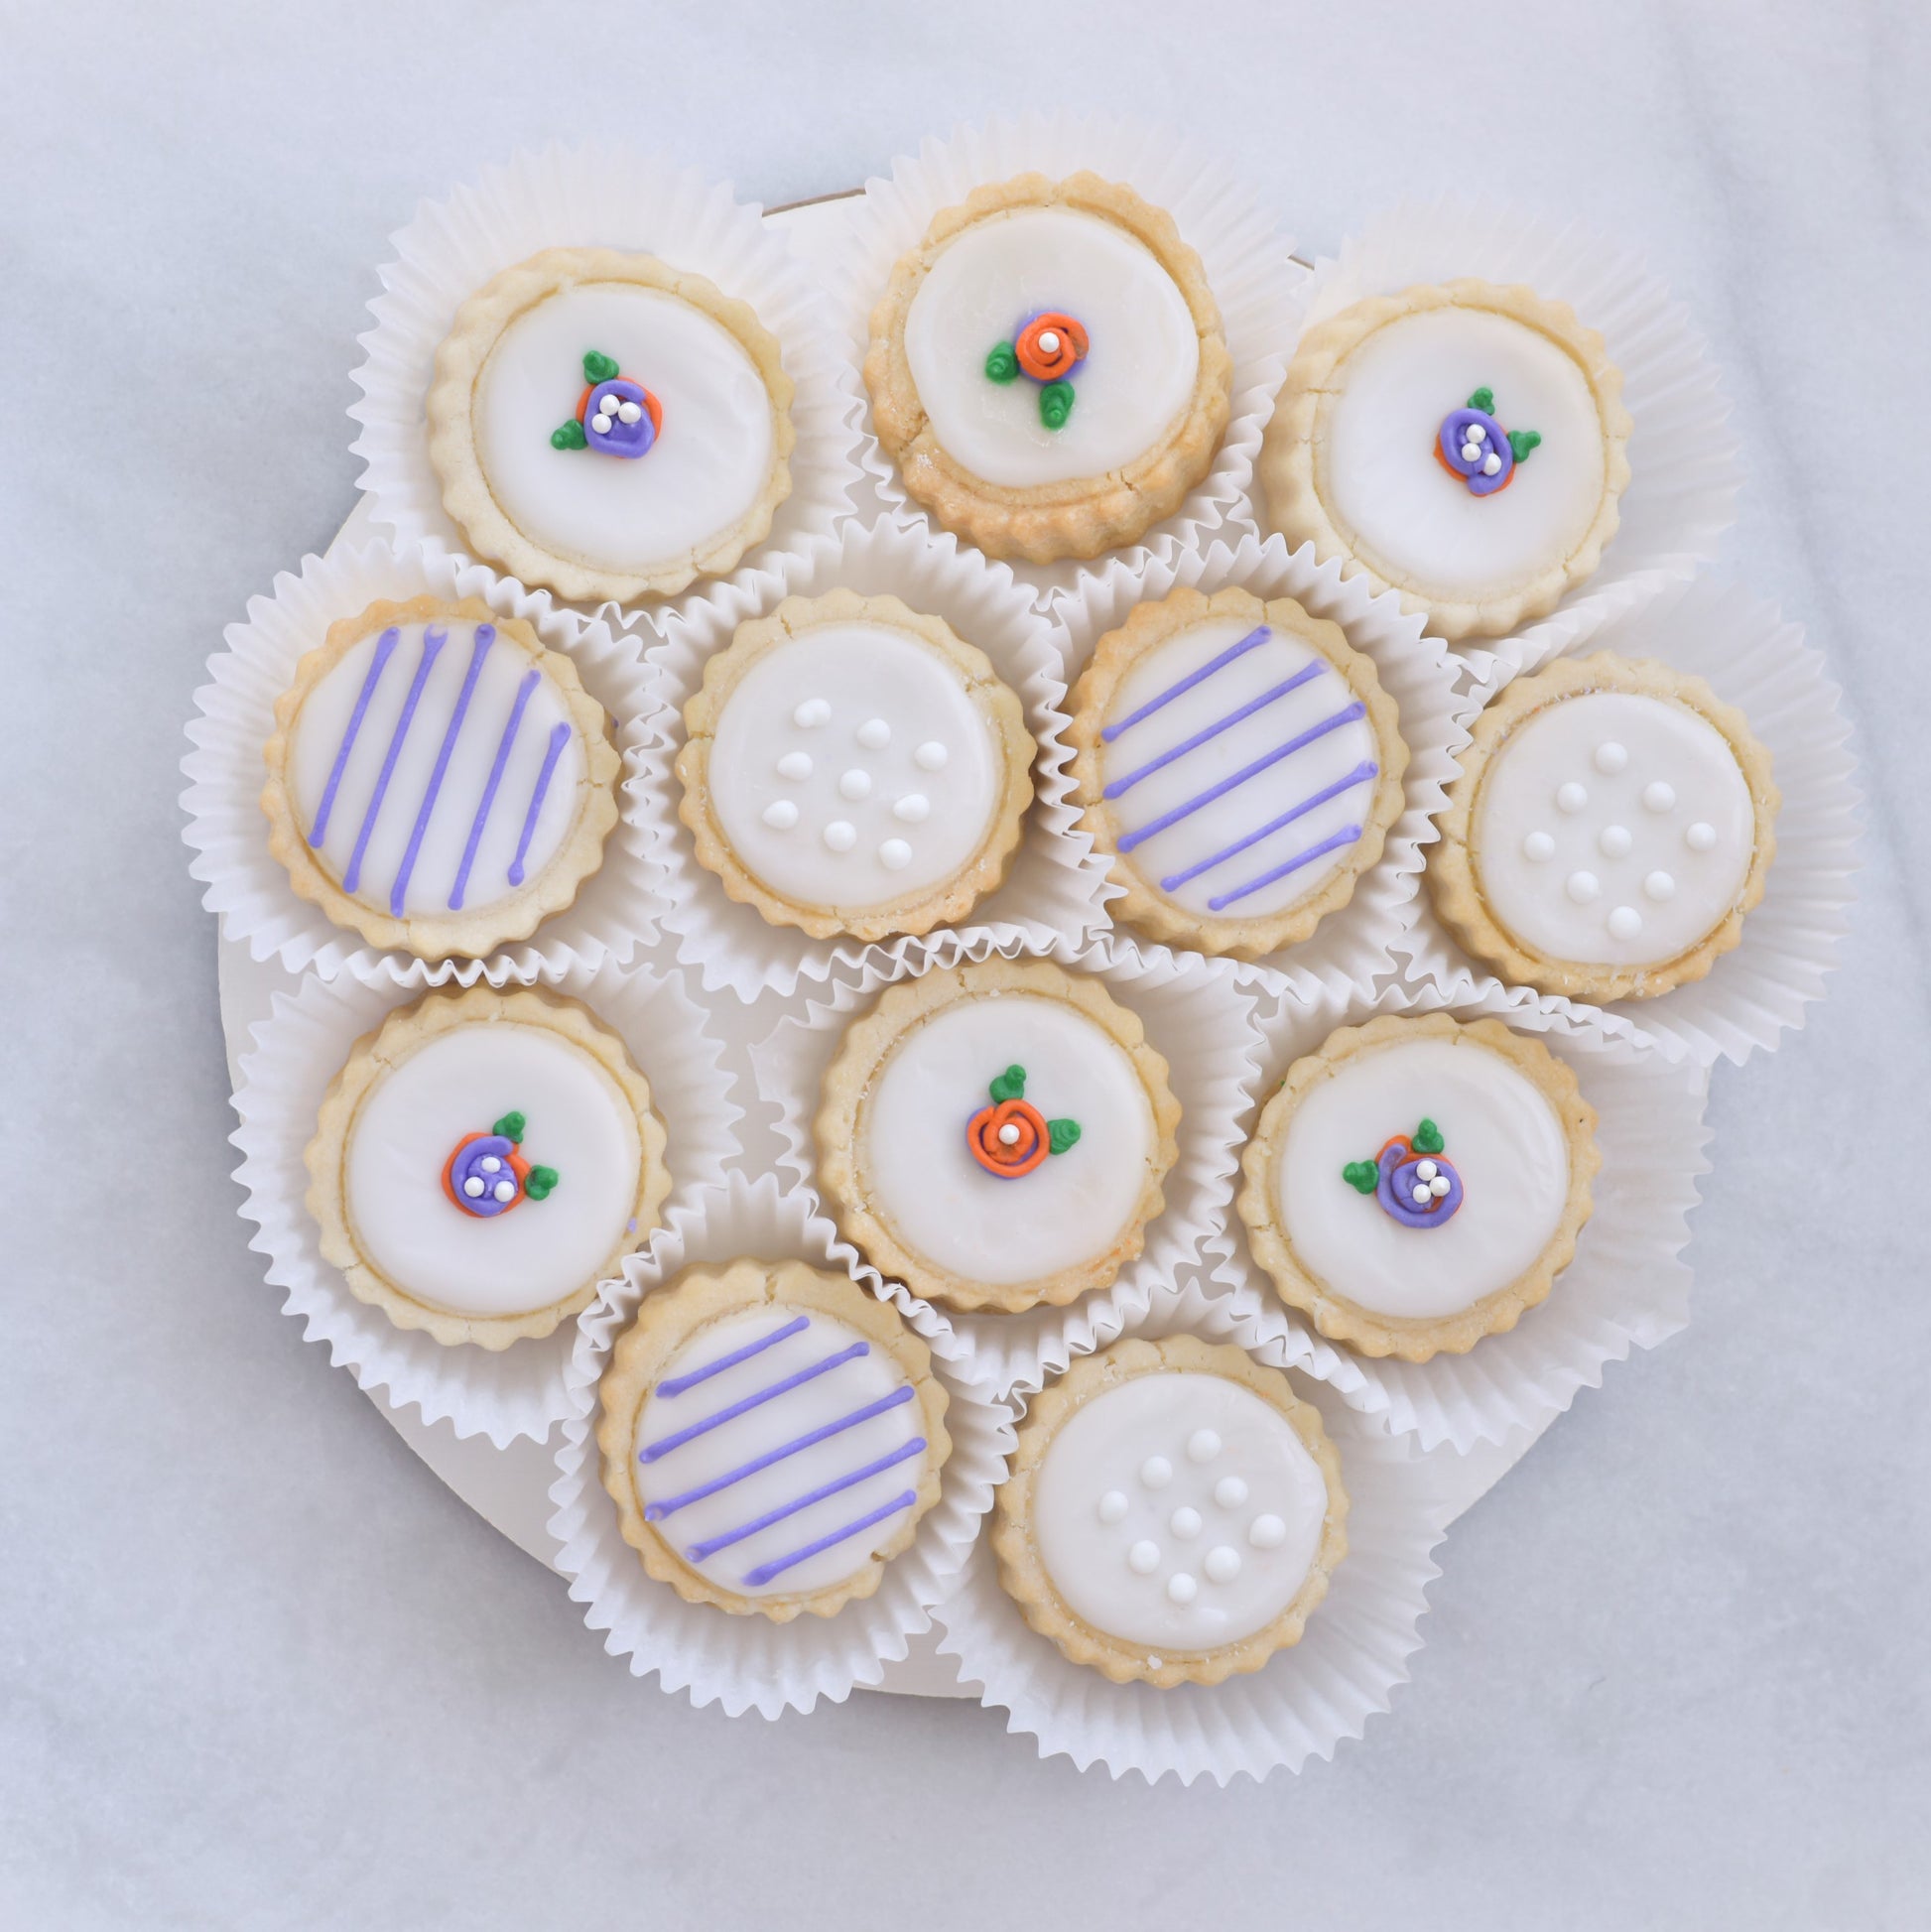 Rosette Tin - Gourmet Cookies, Custom Shortbreads & Holiday Gifts | Dallas, TX